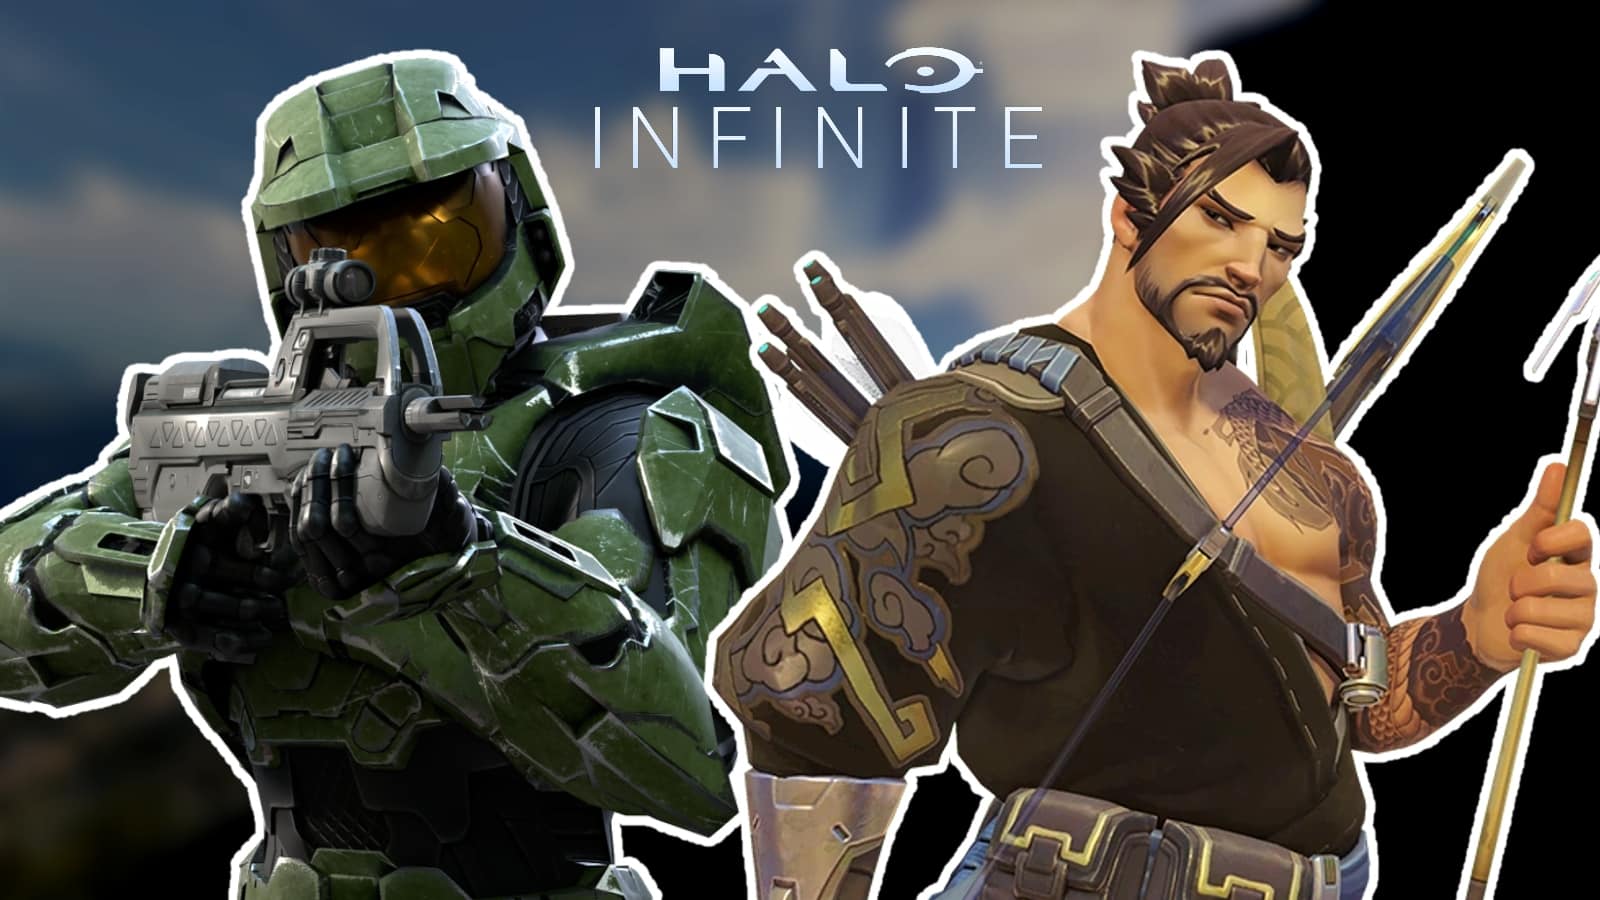 master chief and hanzo on halo background with Halo Infinite logo